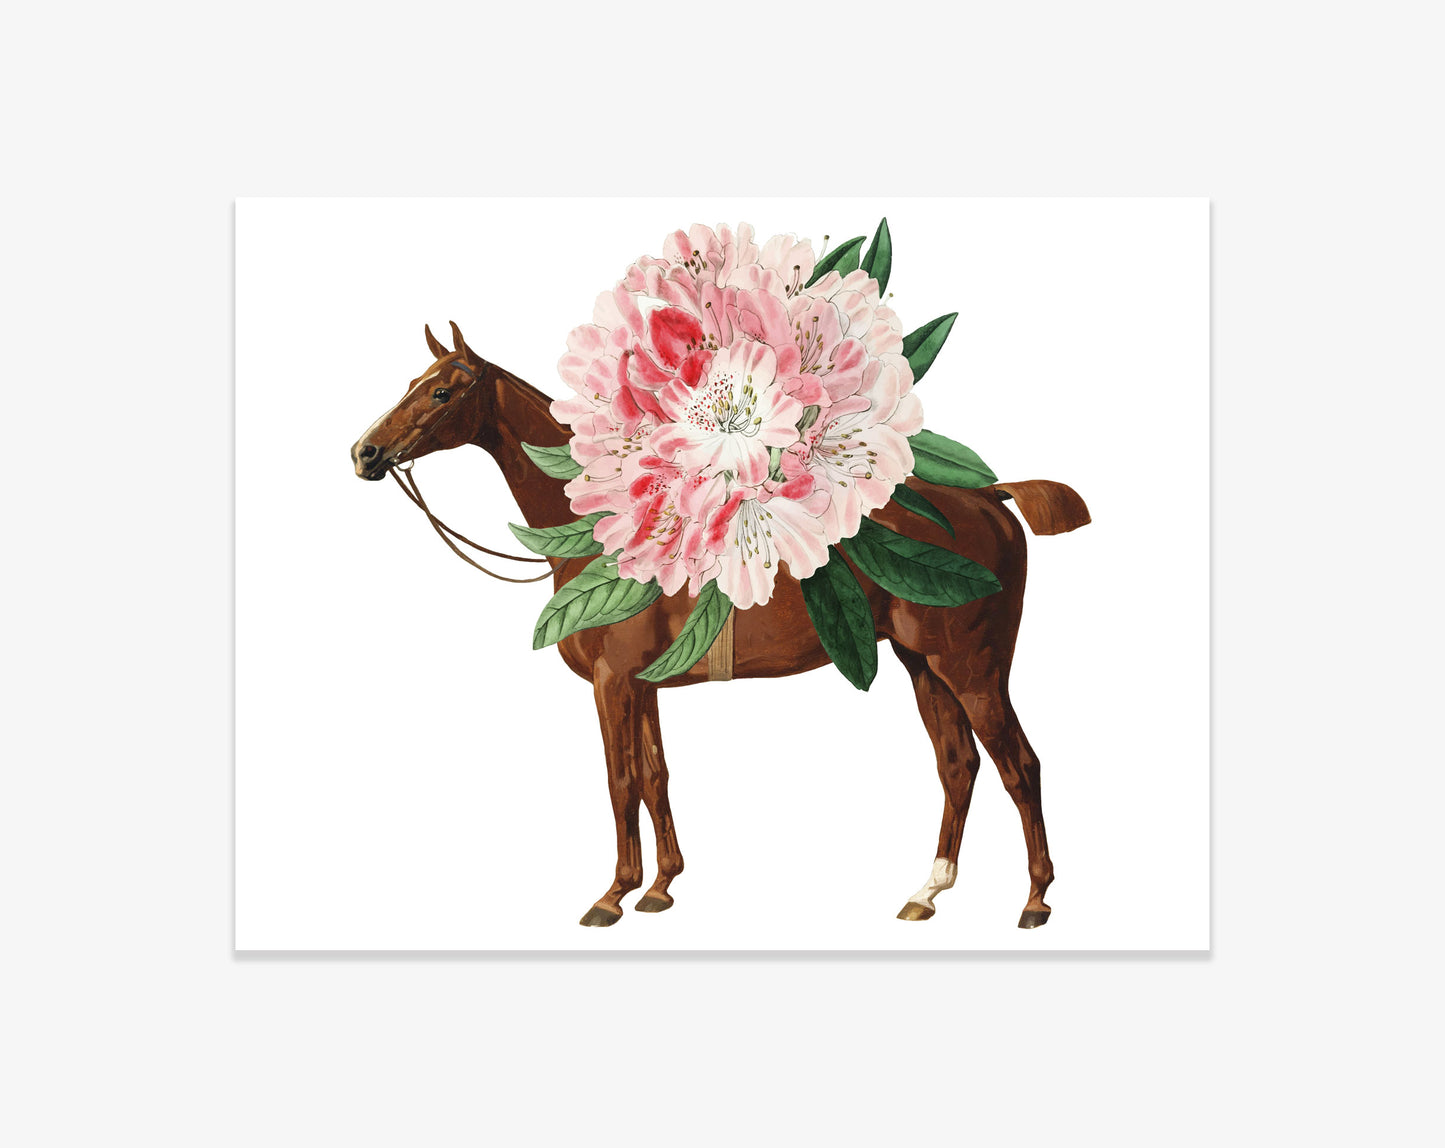 The Style of the Sporting Life™ Personalized Chelsea Horse Correspondence Cards- 2 Options